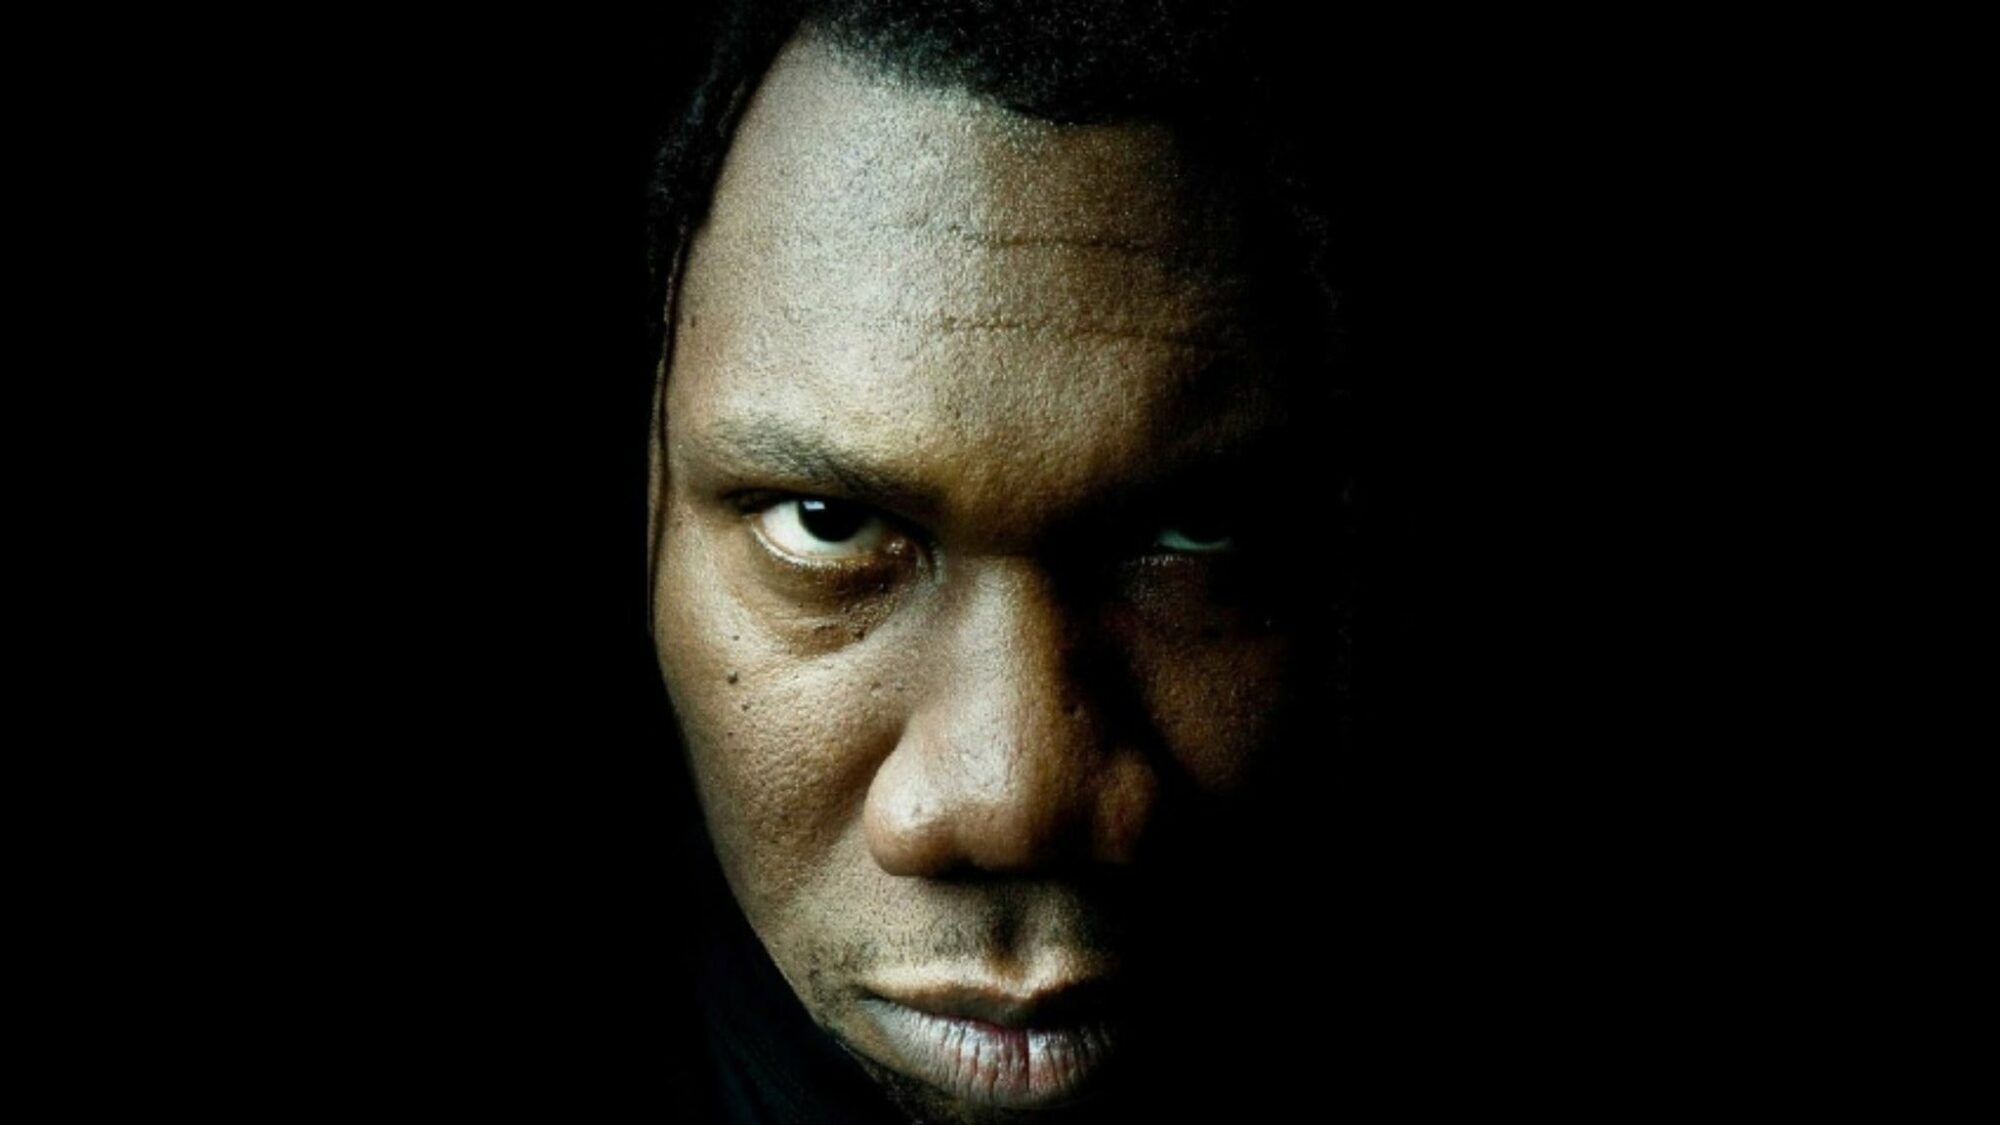 Image name KRS One at Brudenell Social Club Leeds the 14 image from the post KRS-One at Brudenell Social Club, Leeds in Yorkshire.com.